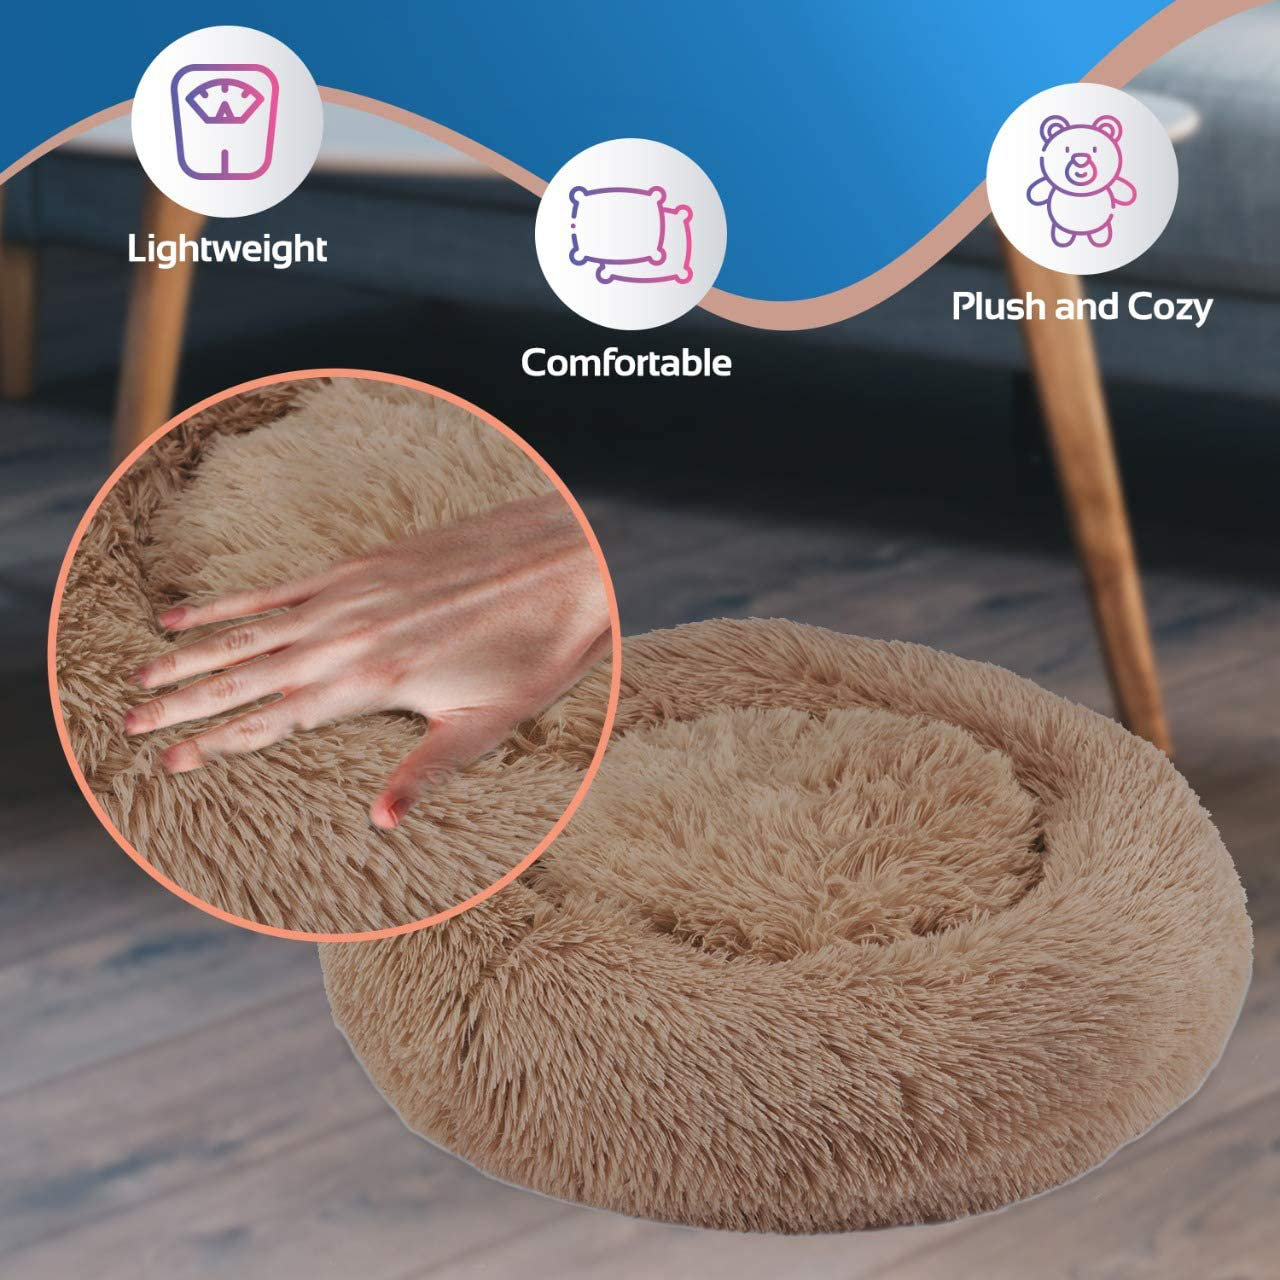 GM PET SUPPLIES Donut Cuddler Dog Bed - Calming Orthopedic round Pet Bed for Dogs and Cats - Fluffy Faux Fur Dog Bed with anti Slip Bottom for Small, Medium, and Large Dogs - Machine Washable